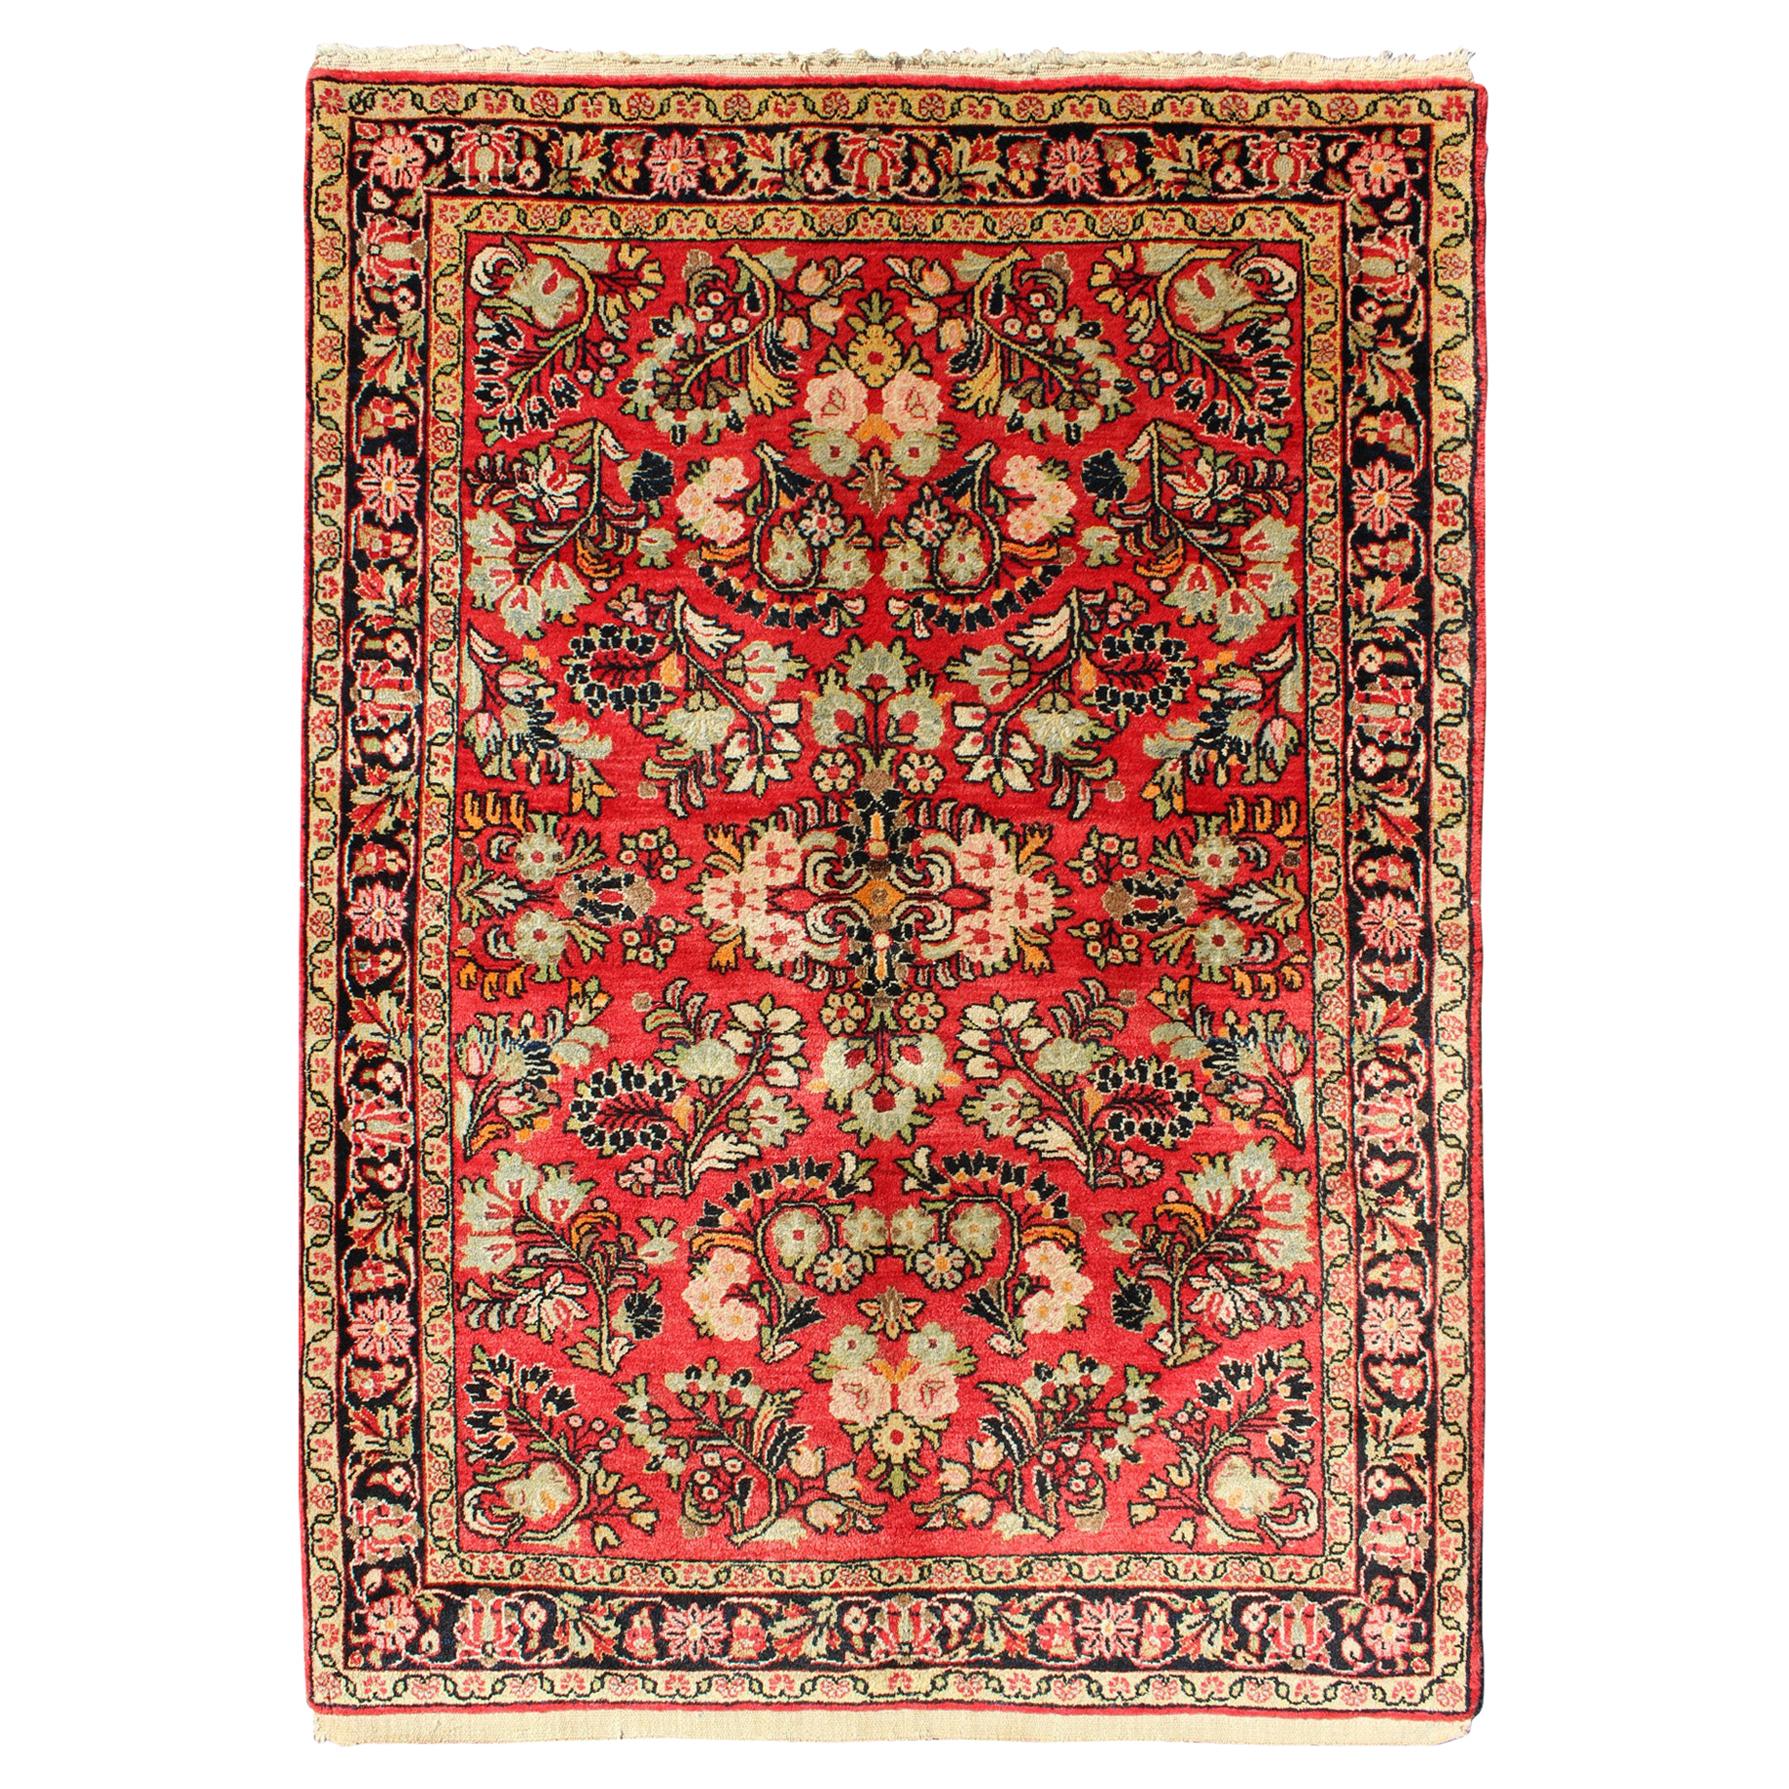 Vintage Persian Sarouk Rug with All-Over Floral Design in Rich Red, Onyx Black